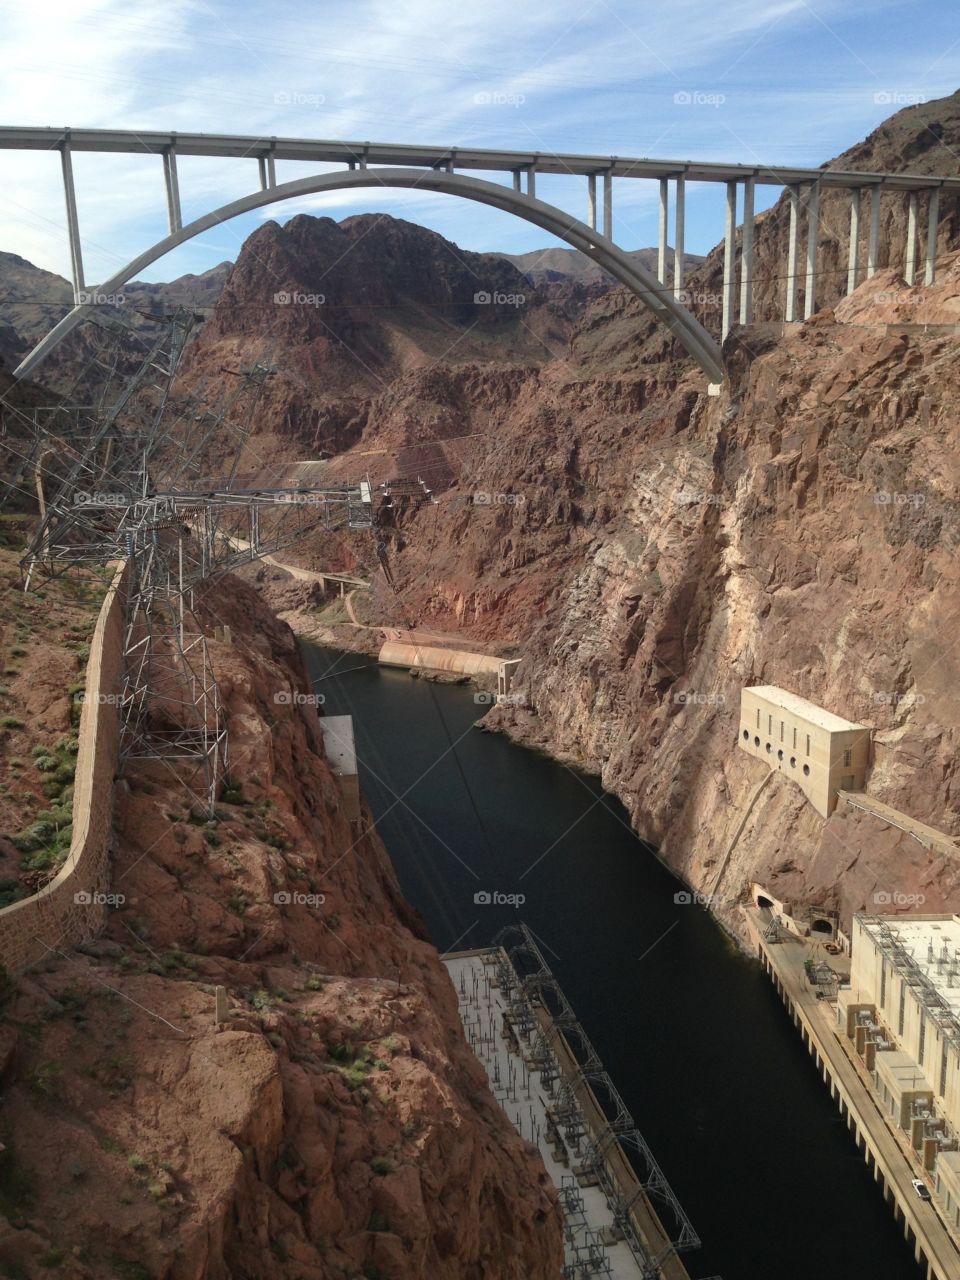 Looking over the Hoover Dam